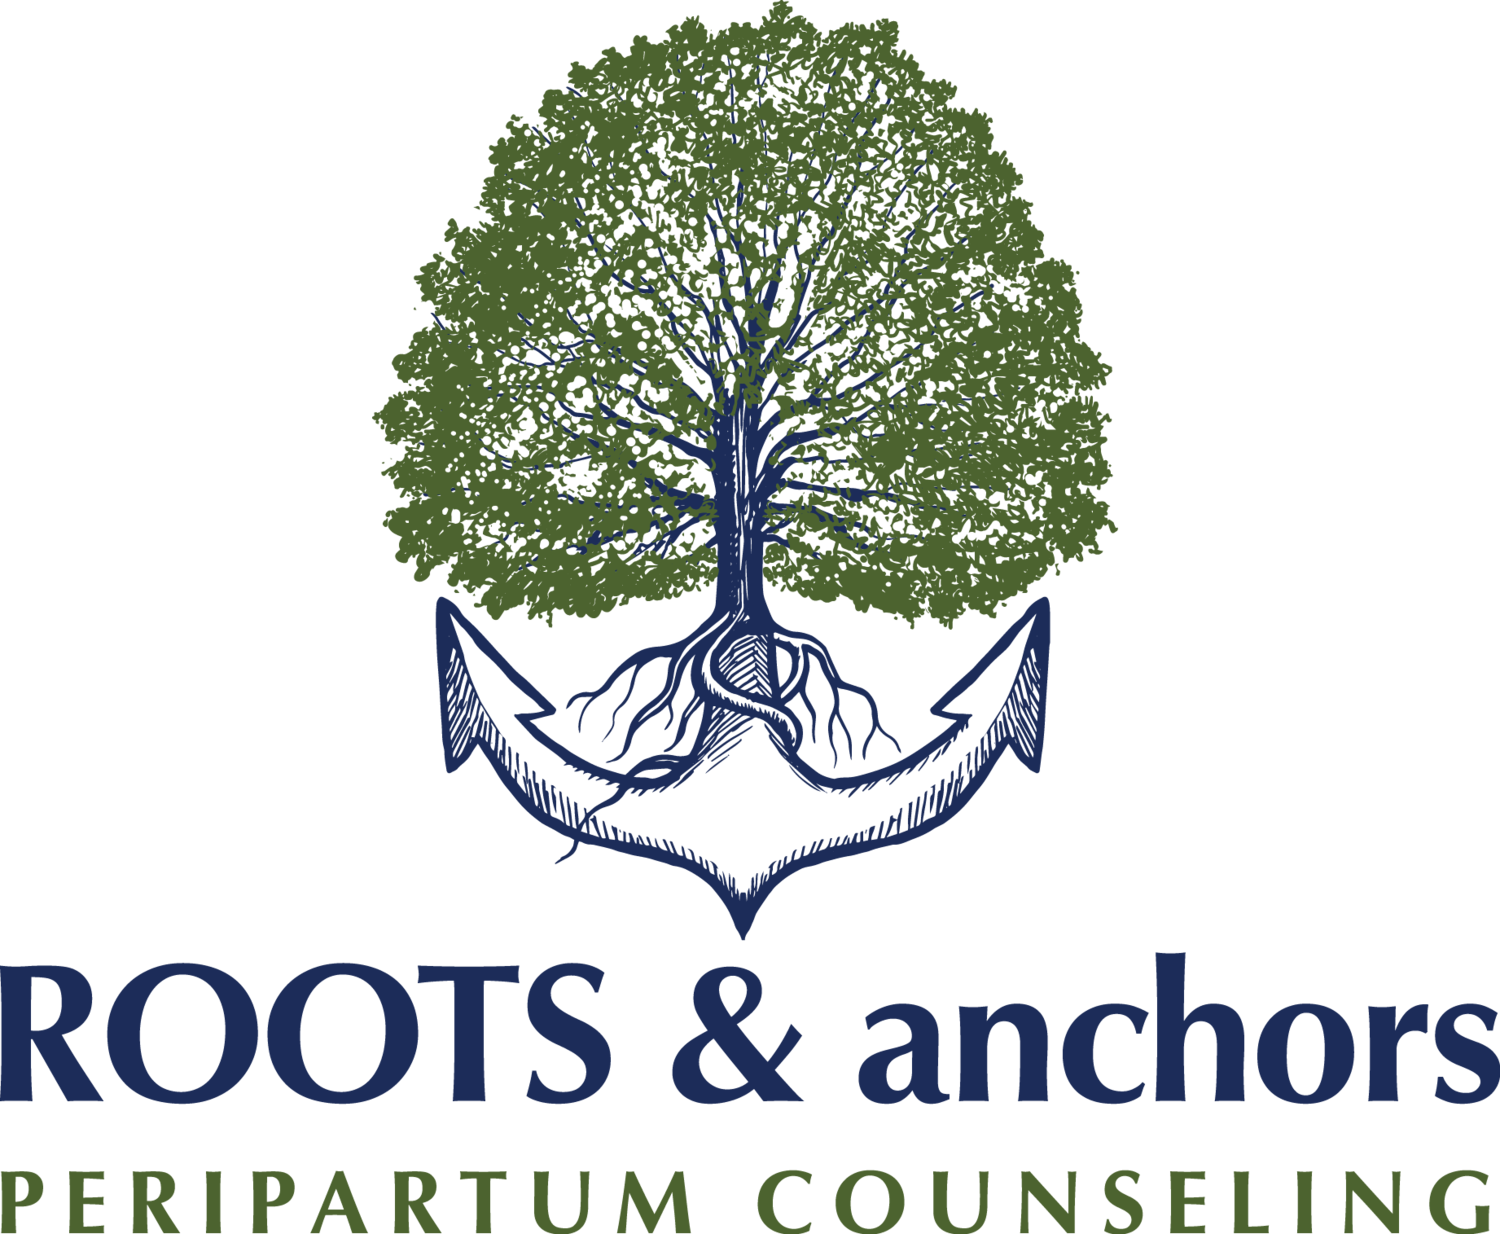 Roots and Anchors peripartum counseling